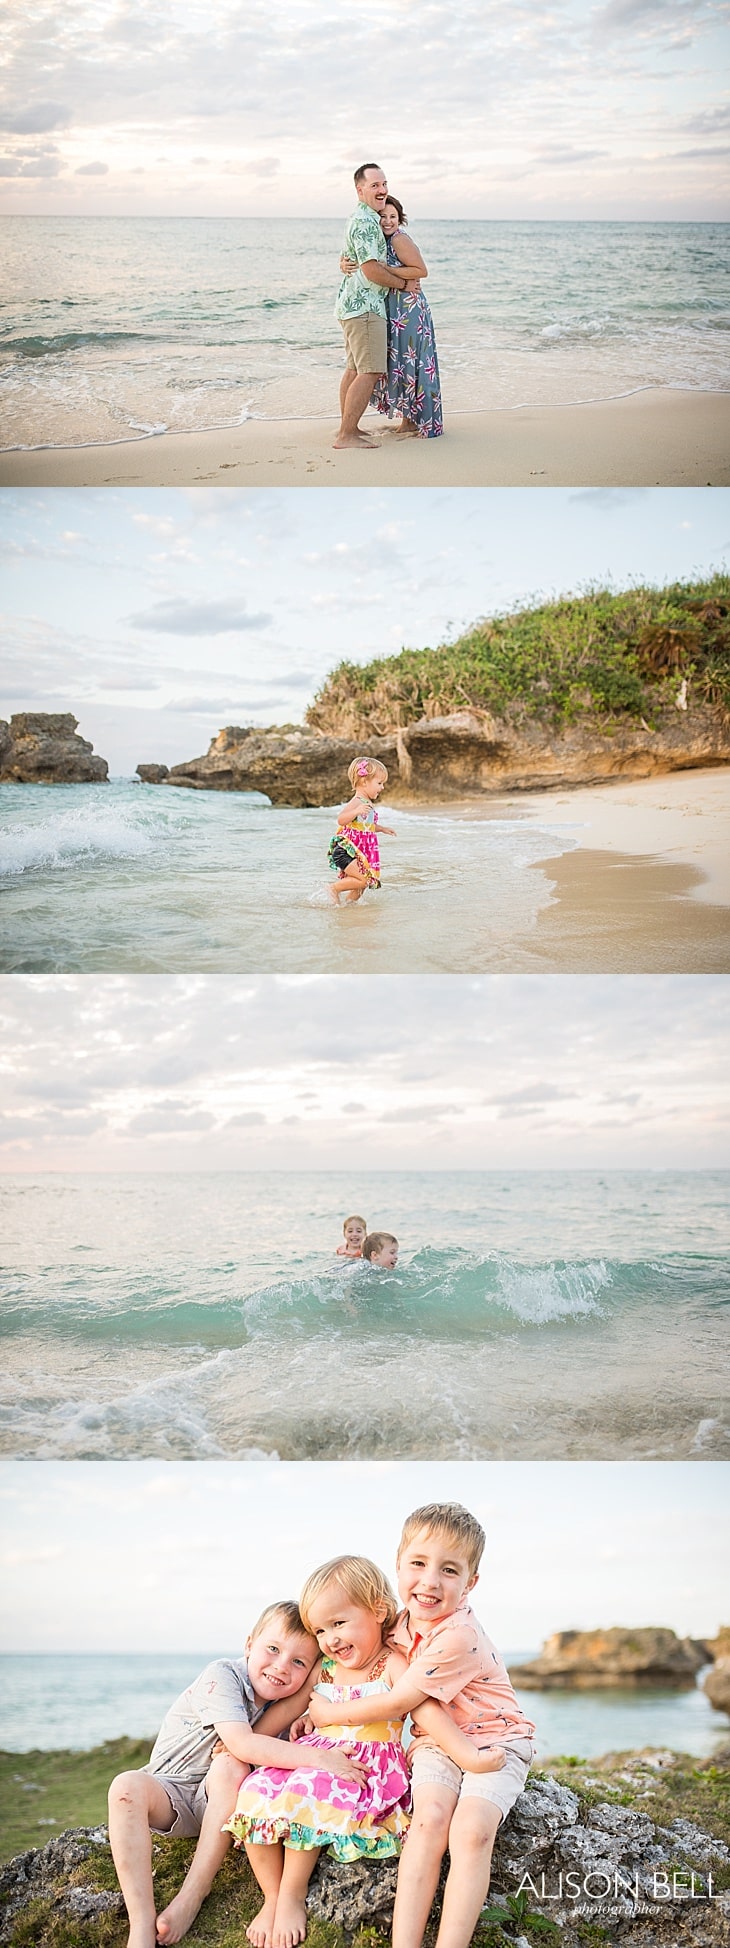 Family of 5, twin boys, beach photo session in Okinawa Japan by Alison Bell, Photographer